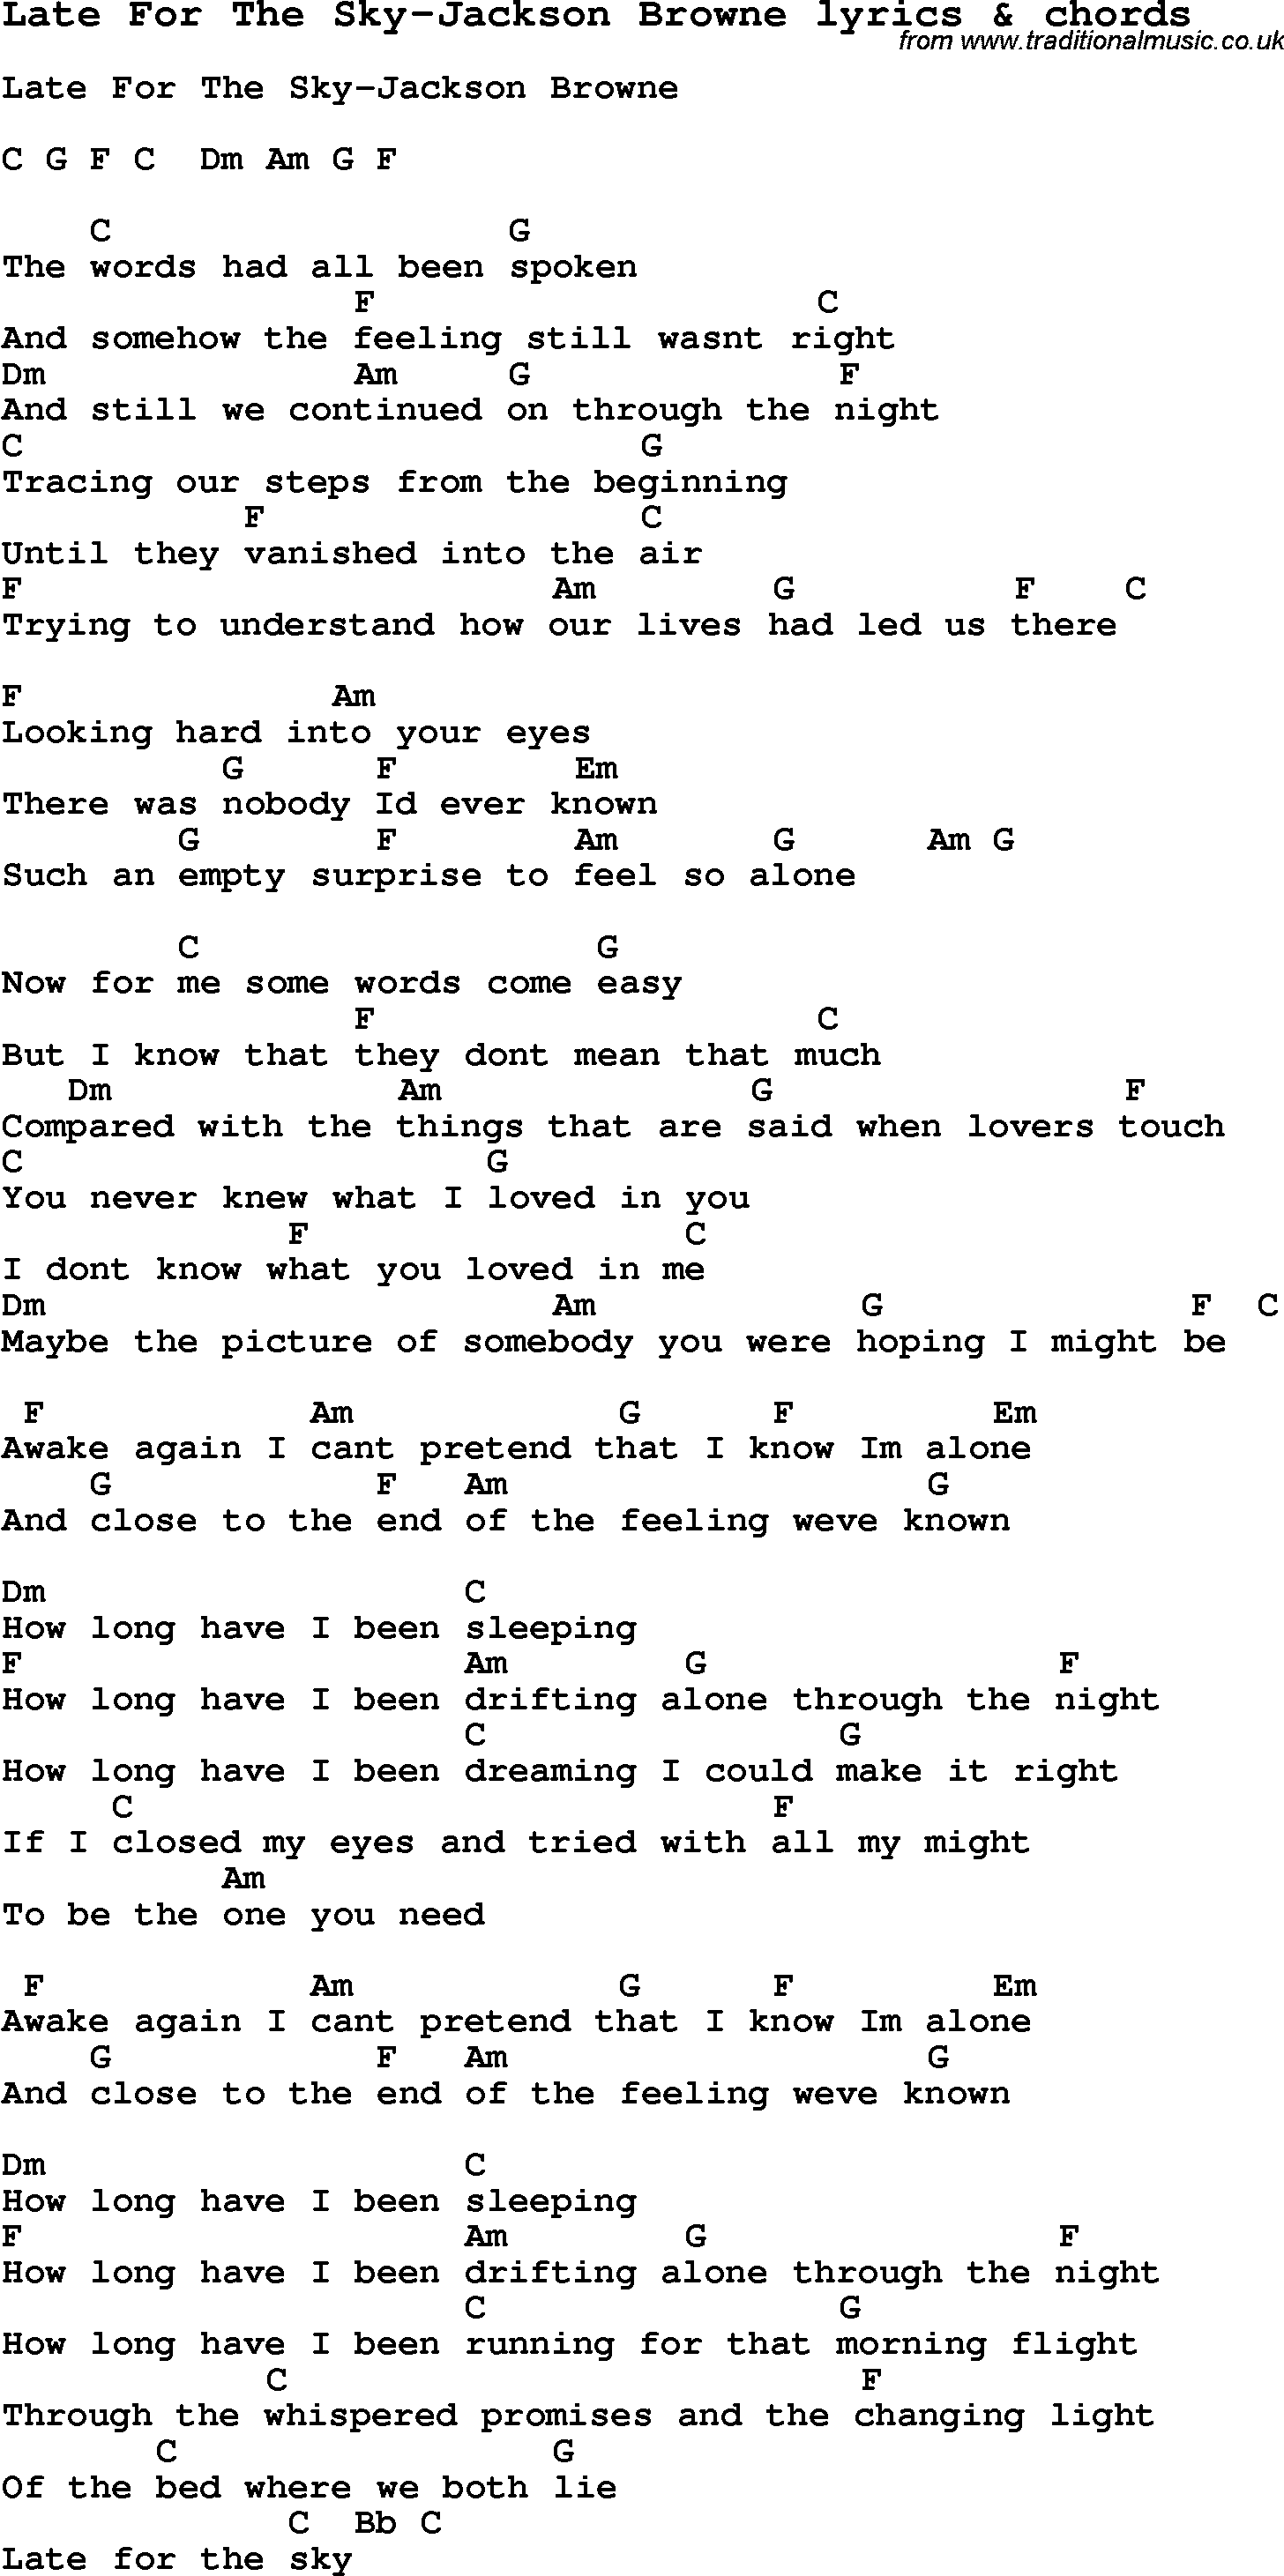 Love Song Lyrics for: Late For The Sky-Jackson Browne with chords for Ukulele, Guitar Banjo etc.